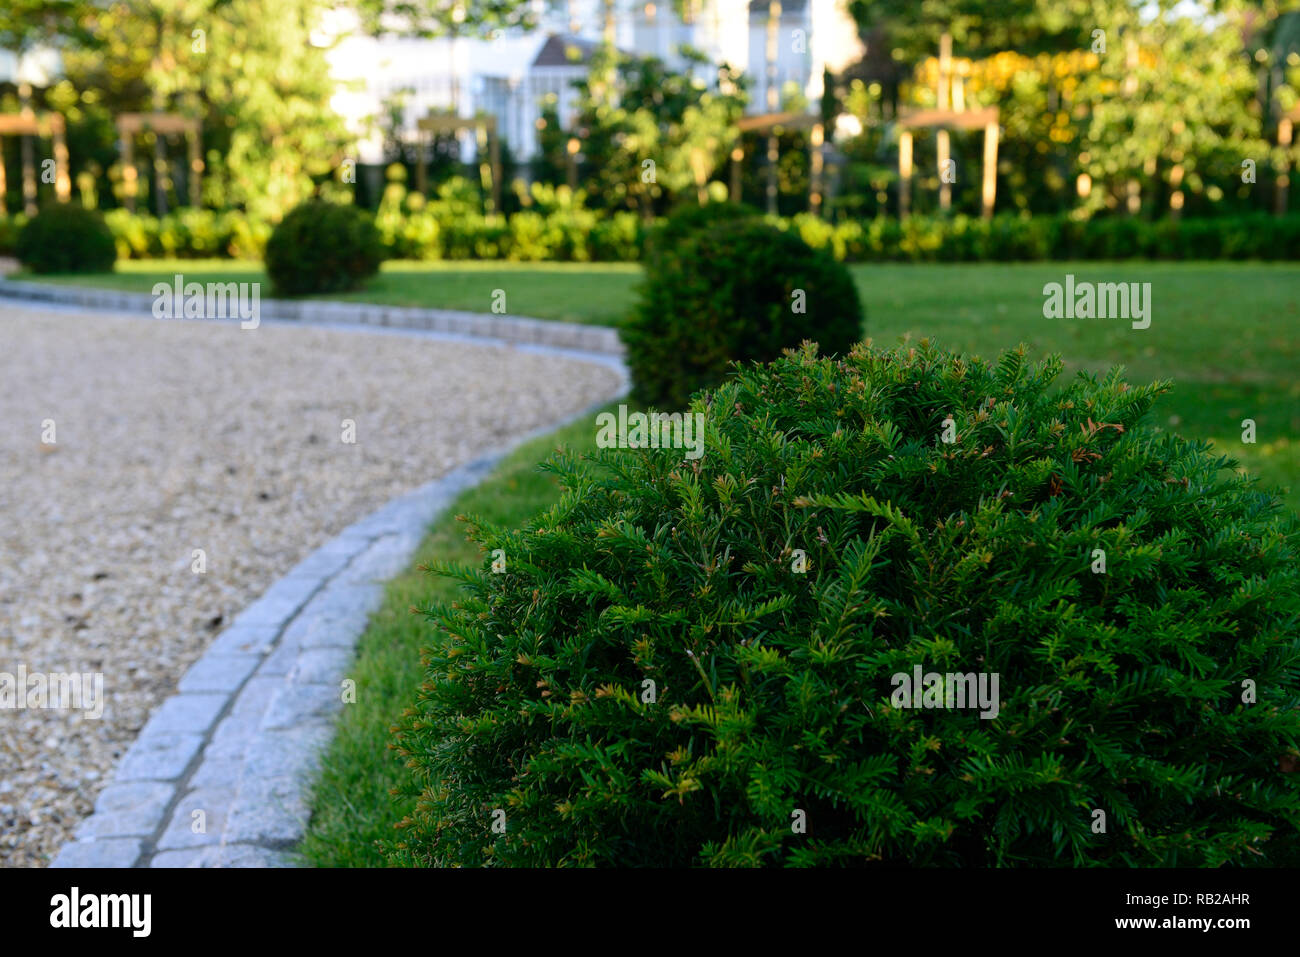 stone edging,edged,edged,lawn,laws,grass,yew ball,balls,garden design,feature,hard landscaping,serpentine,lead,leading,leads the eye,RM Floral Stock Photo